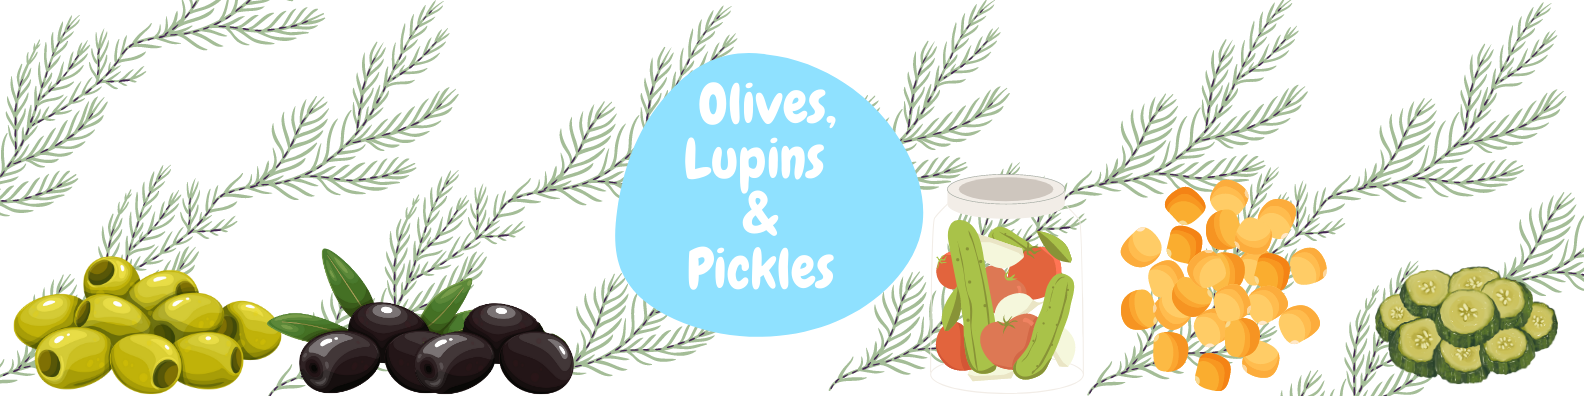 Lupins & Pickles